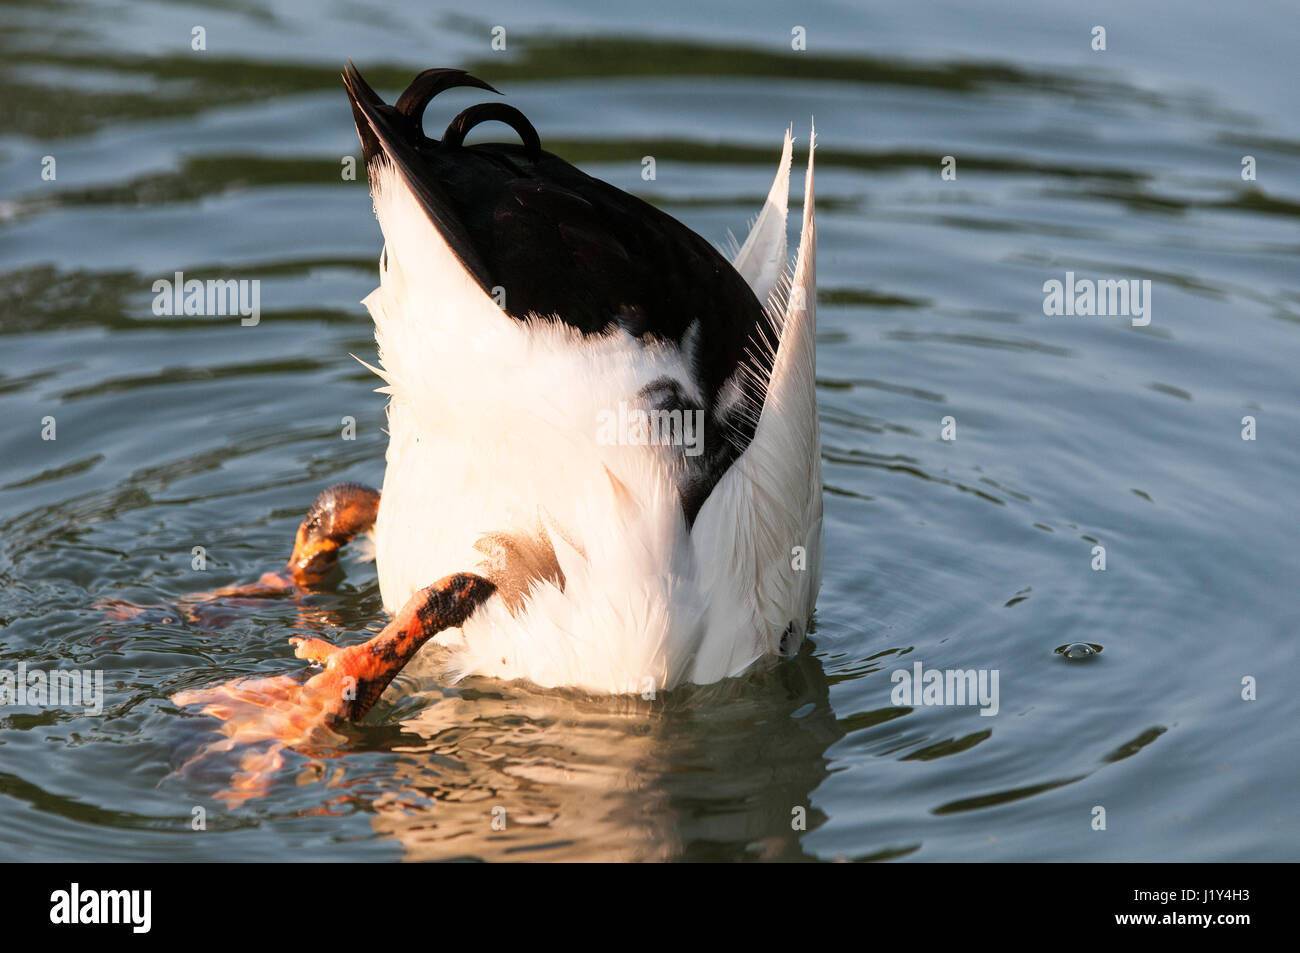 Duck with head underwater, close-up Stock Photo